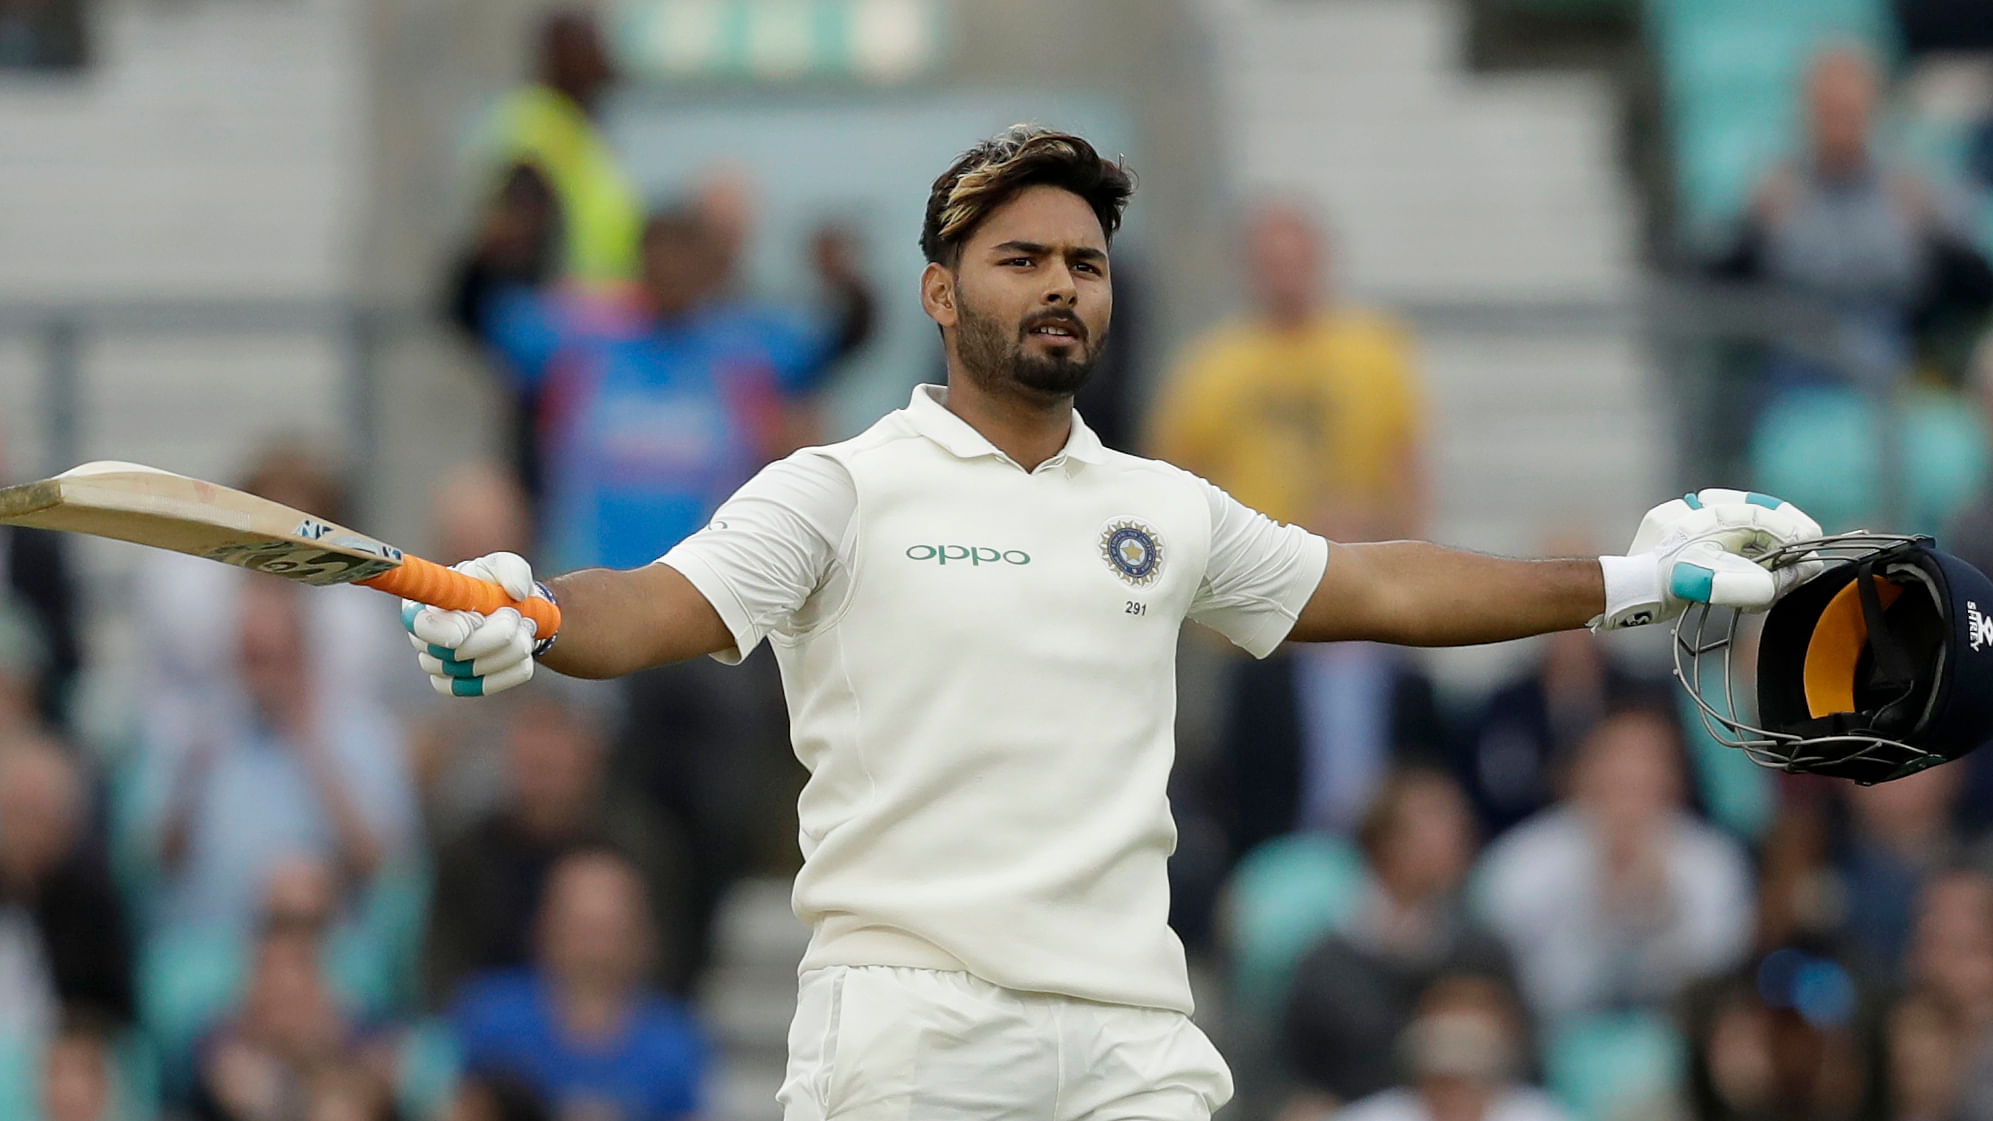 India wicketkeeper Rishabh Pant celebrates his century during the fifth cricket test match of a five match series between England and India at the Oval cricket ground.